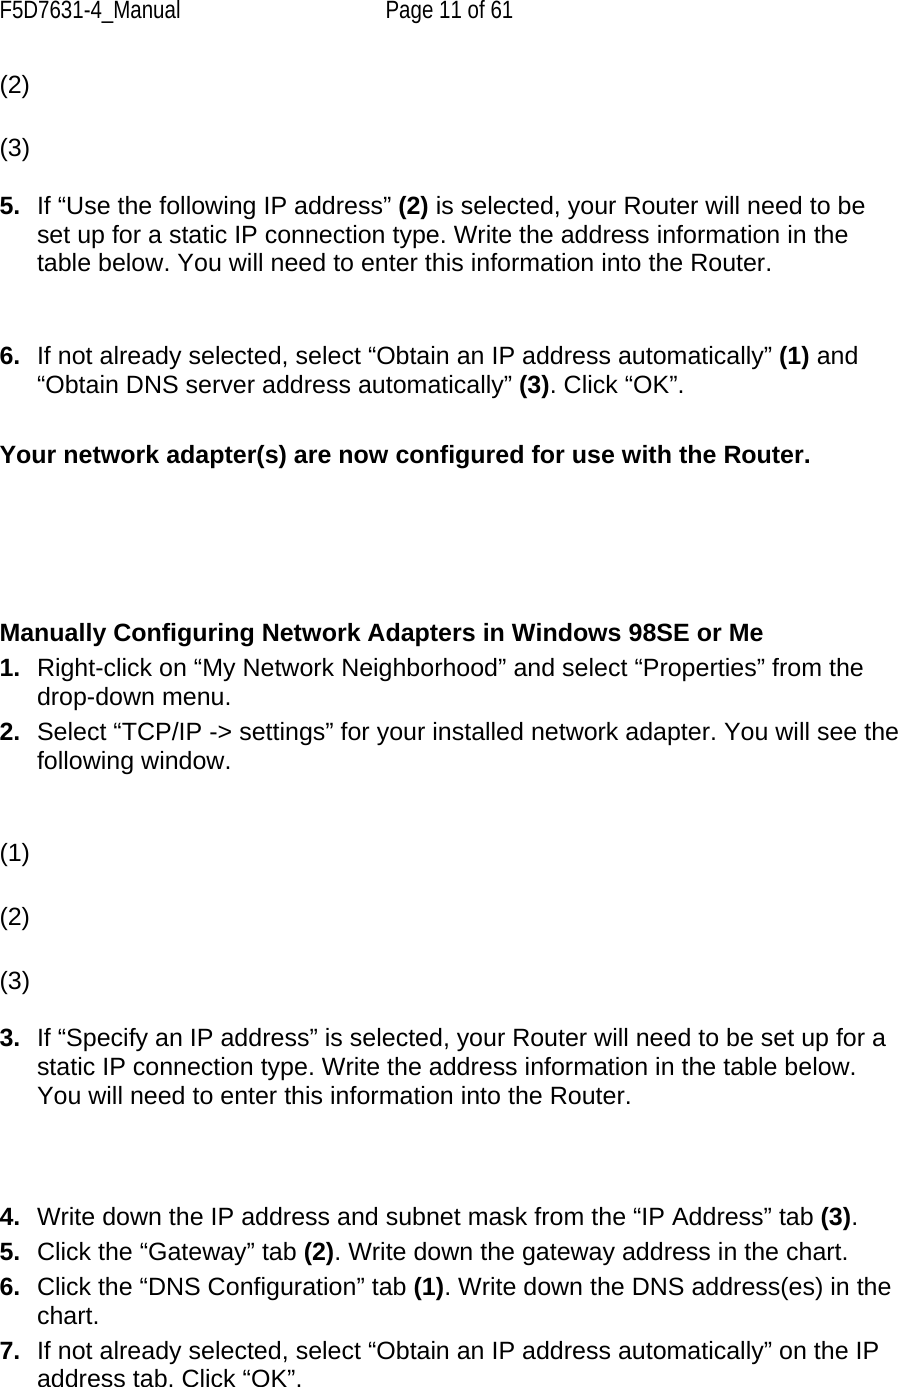 F5D7631-4_Manual  Page 11 of 61 (2) (3)  5.  If “Use the following IP address” (2) is selected, your Router will need to be set up for a static IP connection type. Write the address information in the table below. You will need to enter this information into the Router.   6.  If not already selected, select “Obtain an IP address automatically” (1) and “Obtain DNS server address automatically” (3). Click “OK”.  Your network adapter(s) are now configured for use with the Router.       Manually Configuring Network Adapters in Windows 98SE or Me 1.  Right-click on “My Network Neighborhood” and select “Properties” from the drop-down menu. 2.  Select “TCP/IP -&gt; settings” for your installed network adapter. You will see the following window.   (1) (2) (3)  3.  If “Specify an IP address” is selected, your Router will need to be set up for a static IP connection type. Write the address information in the table below. You will need to enter this information into the Router.    4.  Write down the IP address and subnet mask from the “IP Address” tab (3). 5.  Click the “Gateway” tab (2). Write down the gateway address in the chart. 6.  Click the “DNS Configuration” tab (1). Write down the DNS address(es) in the chart. 7.  If not already selected, select “Obtain an IP address automatically” on the IP address tab. Click “OK”. 